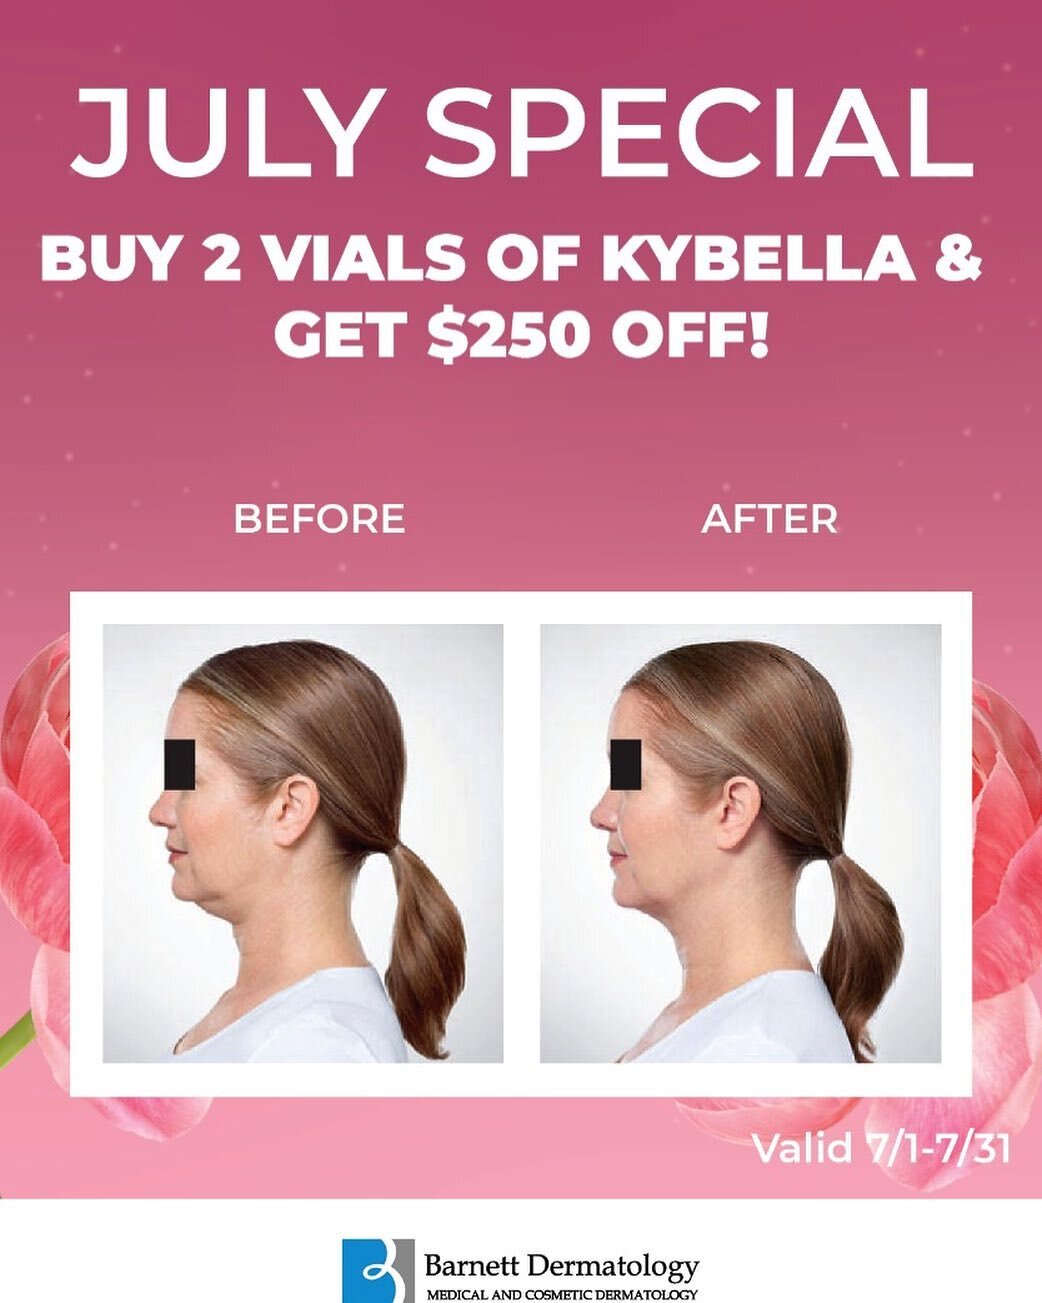 ✨Kybella ✨

Say goodbye to your double chin and hello to Kybella 😍

Kybella is an injectable that melts away stubborn chin fat. 

Q: How long does it last? 
A: This is a permanent treatment.

Q: What is the down time?
A: You will be swollen around t